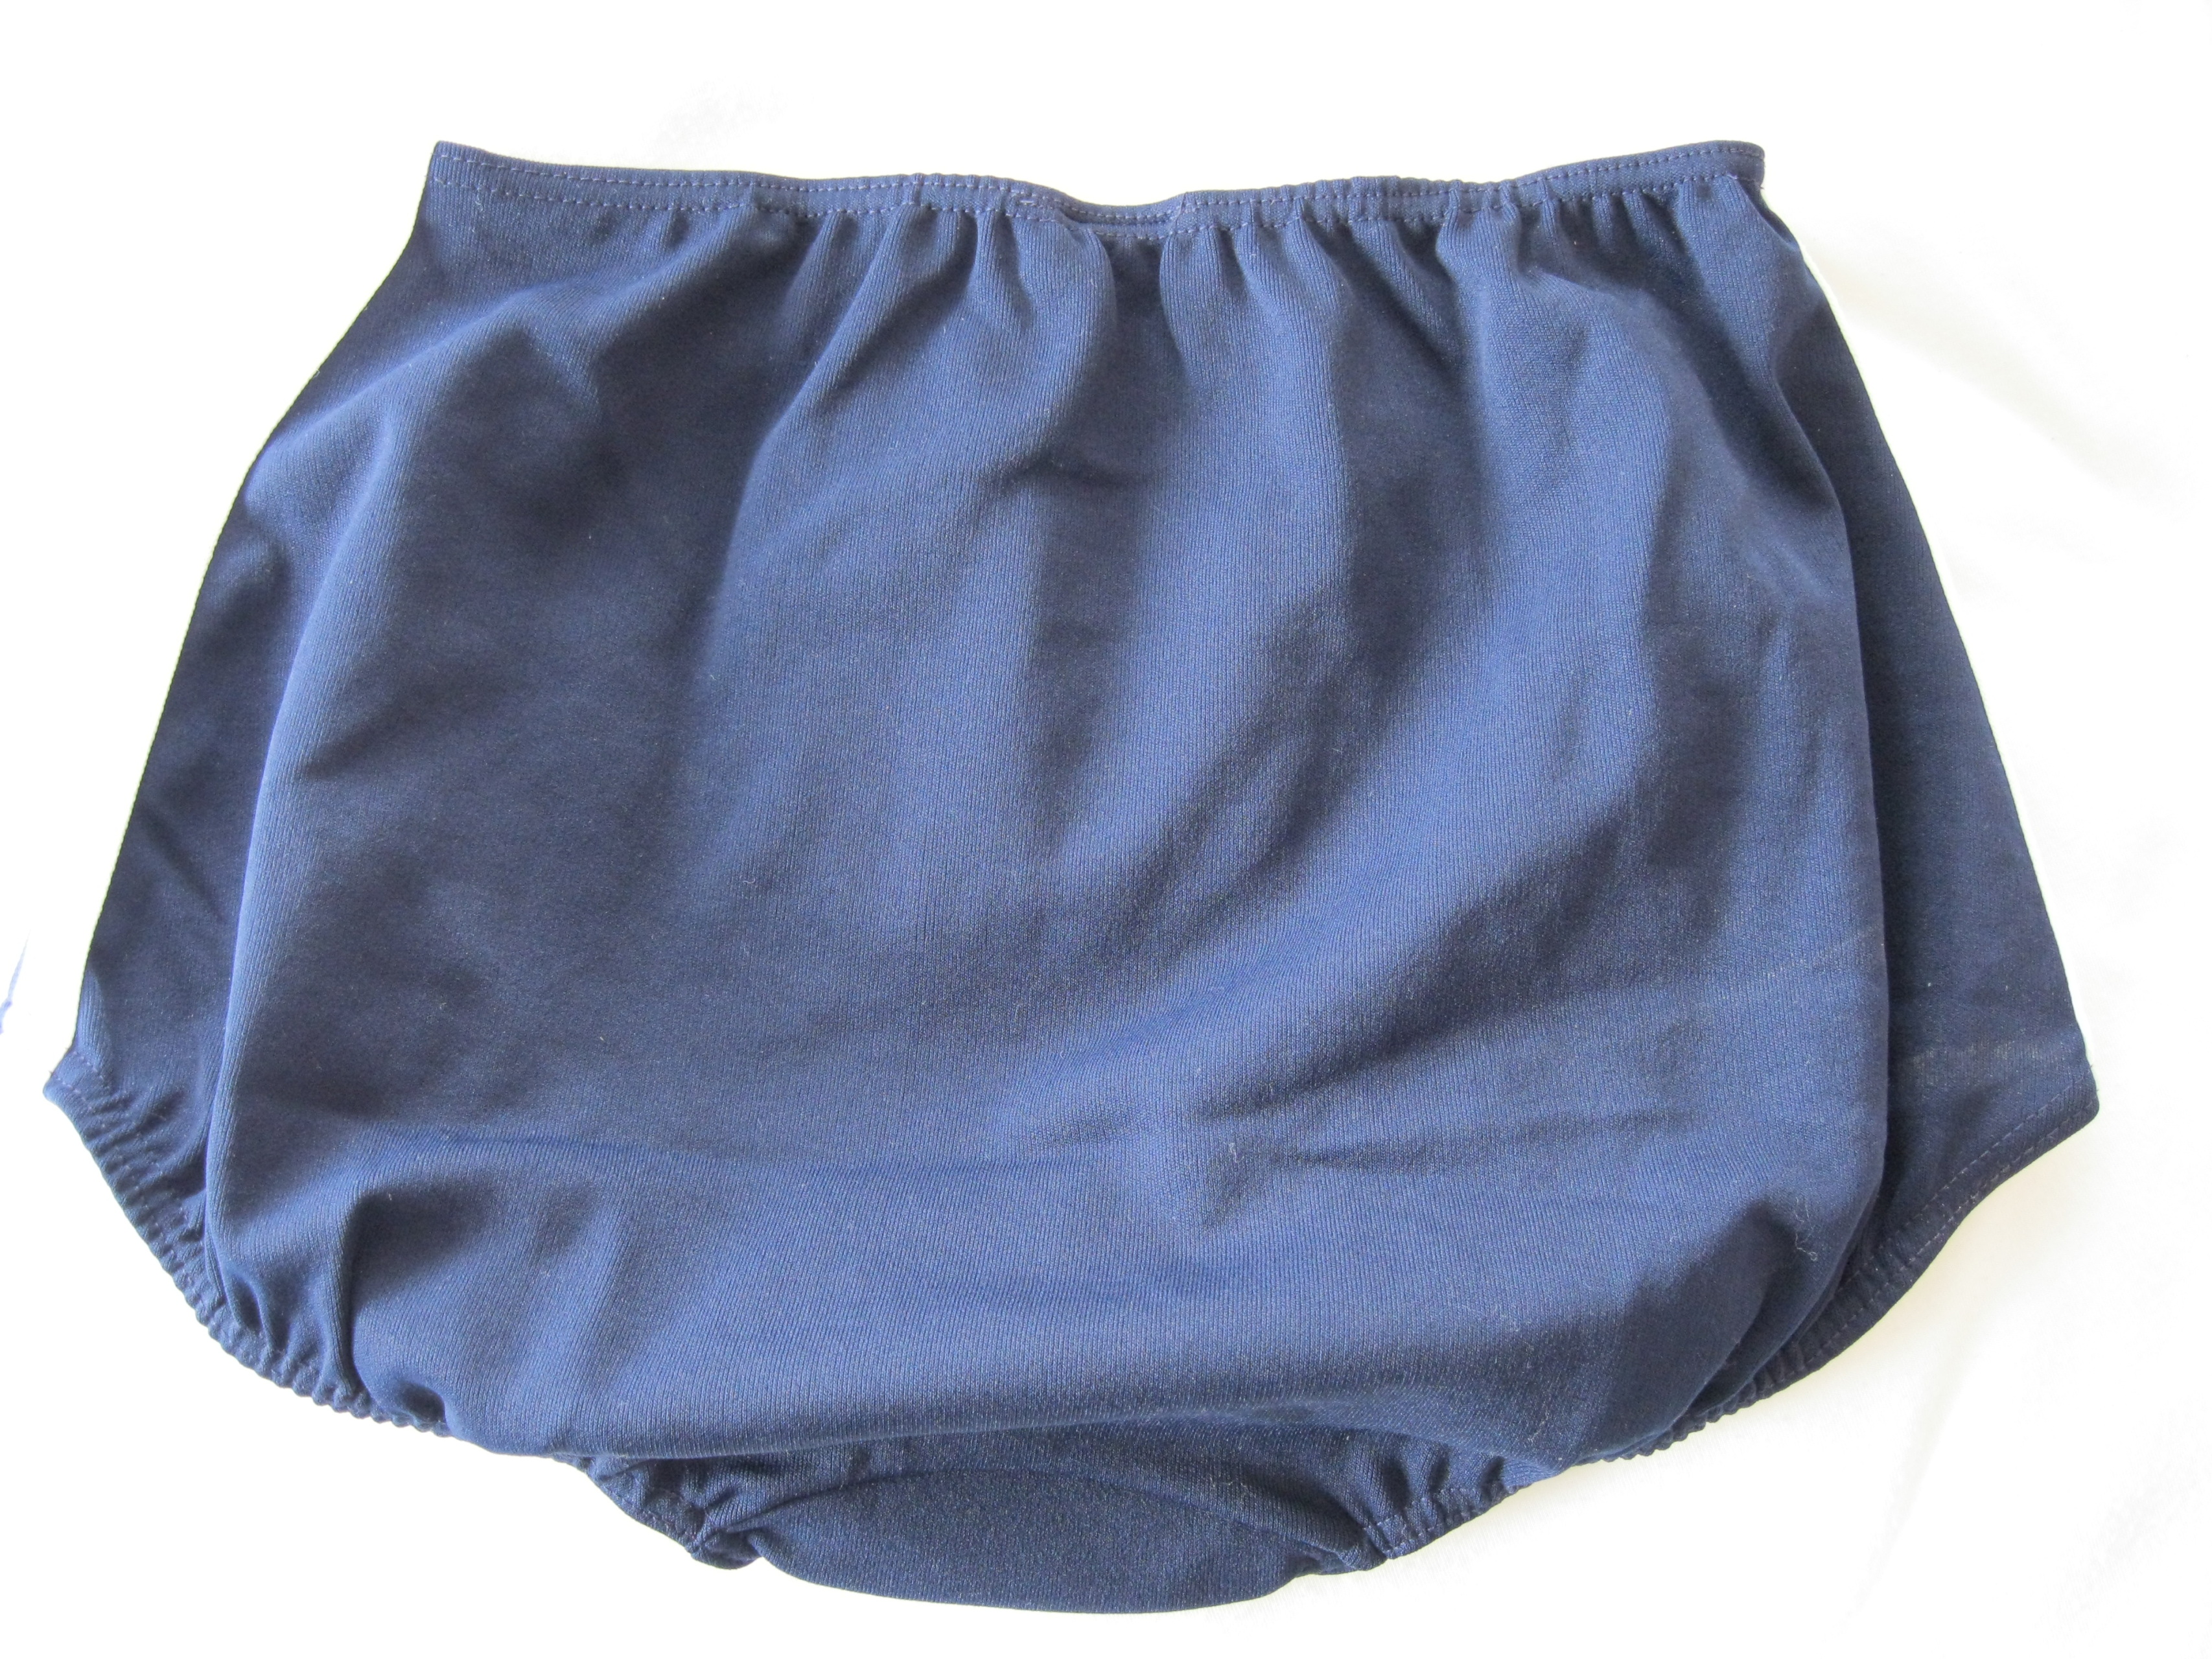 ReviewSpot - Navy Blue Knickers, Gym Slips and School Dinners - A